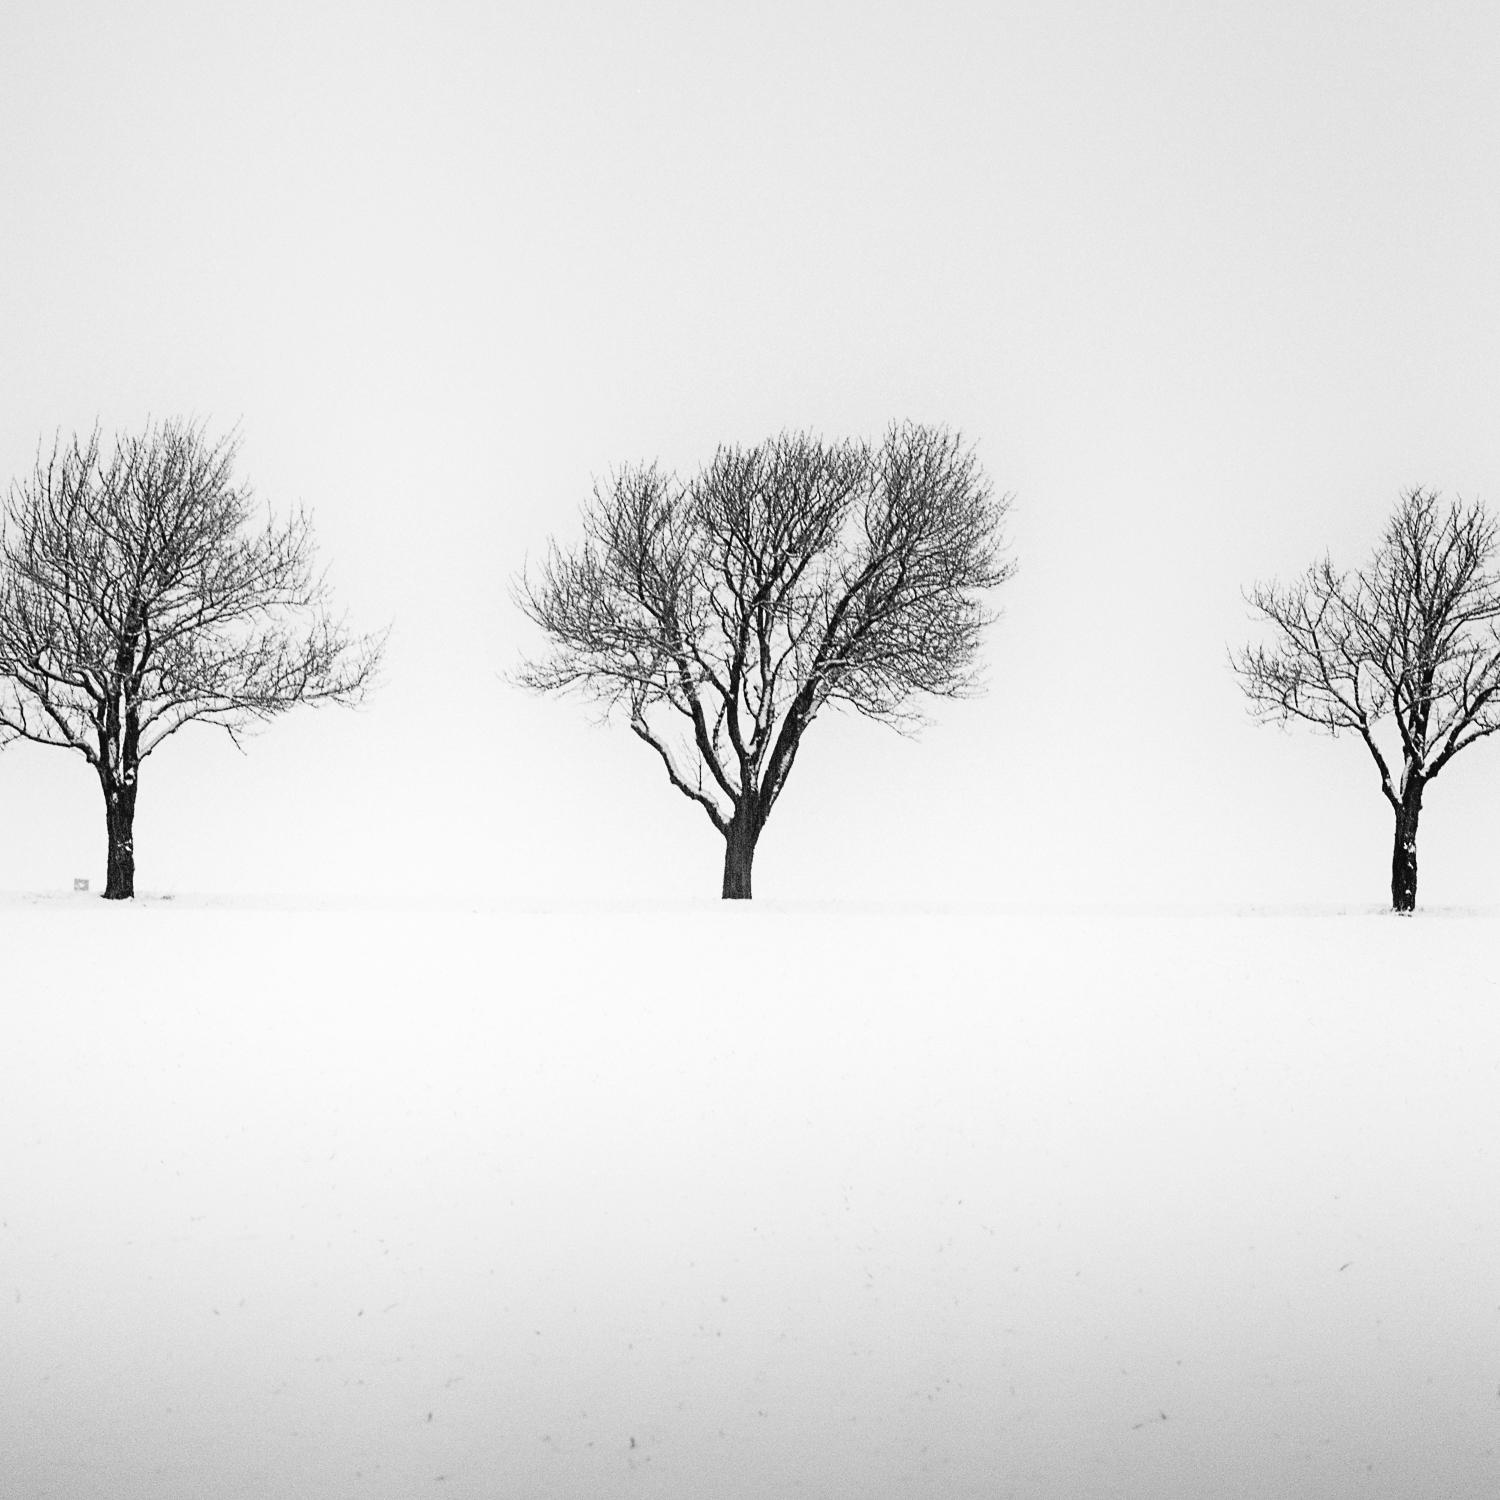 Trees in snowy Field, black and white gelatin silver fineart photography, framed - Contemporary Photograph by Gerald Berghammer